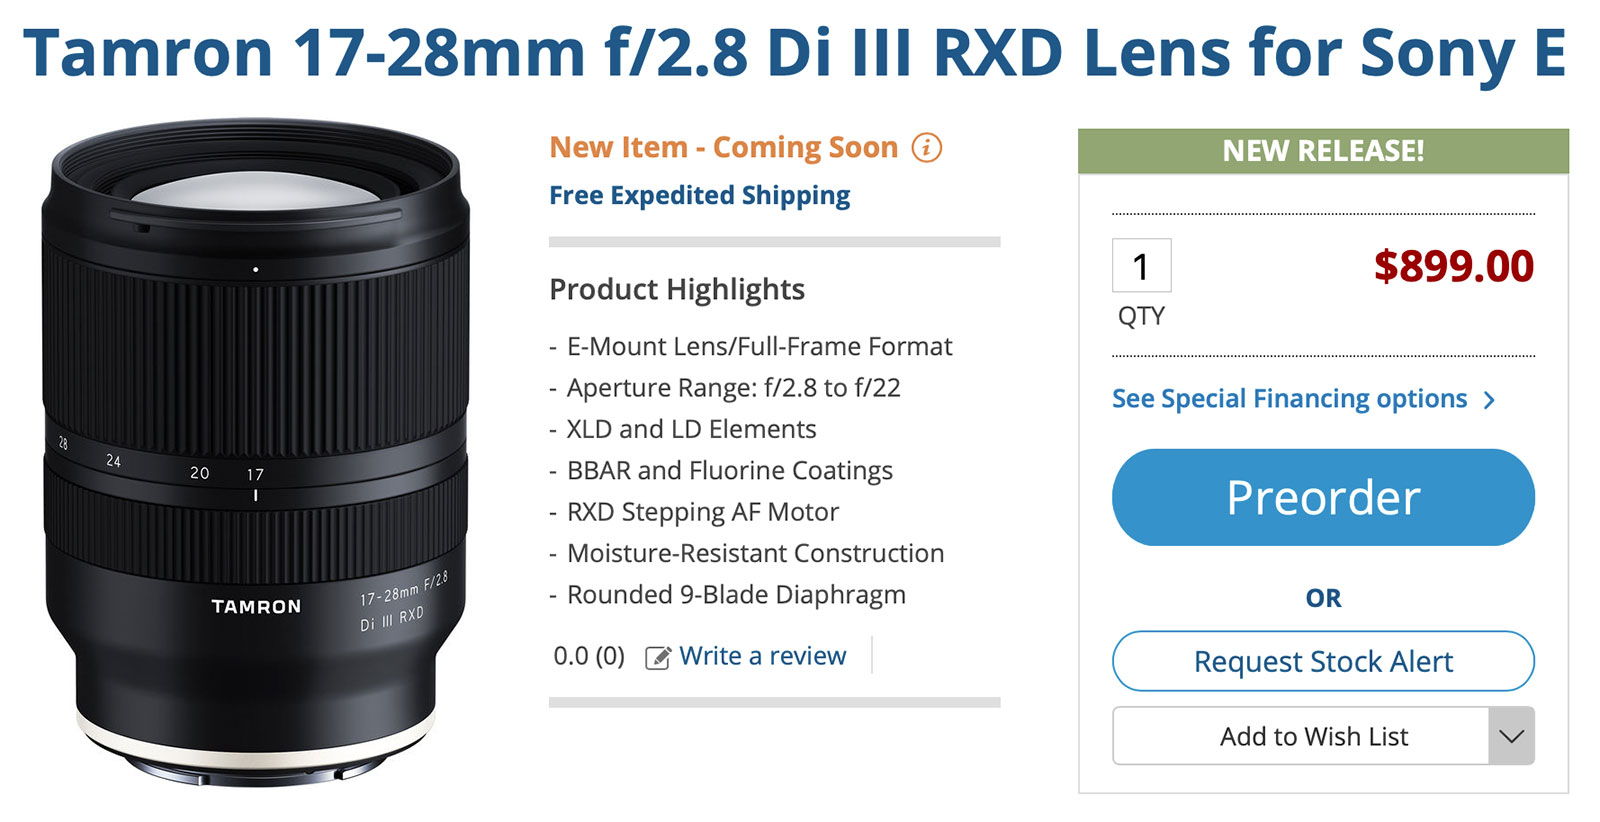 Tamron 17-28mm f/2.8 Di III RXD FE Lens Available for $899